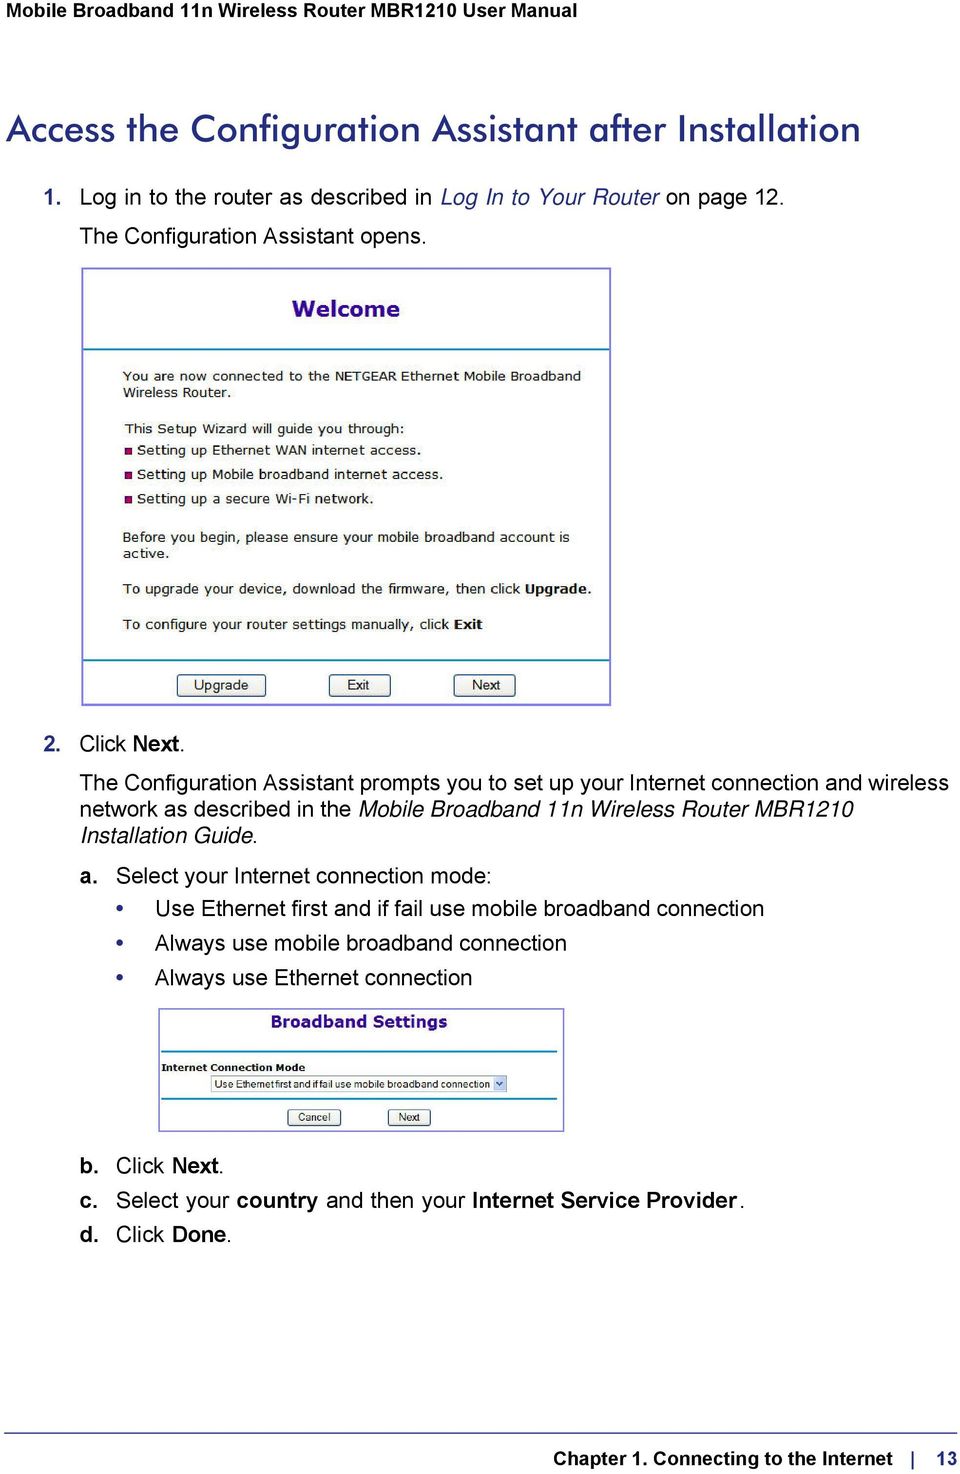 The Configuration Assistant prompts you to set up your Internet connection and wireless network as described in the Mobile Broadband 11n Wireless Router MBR1210